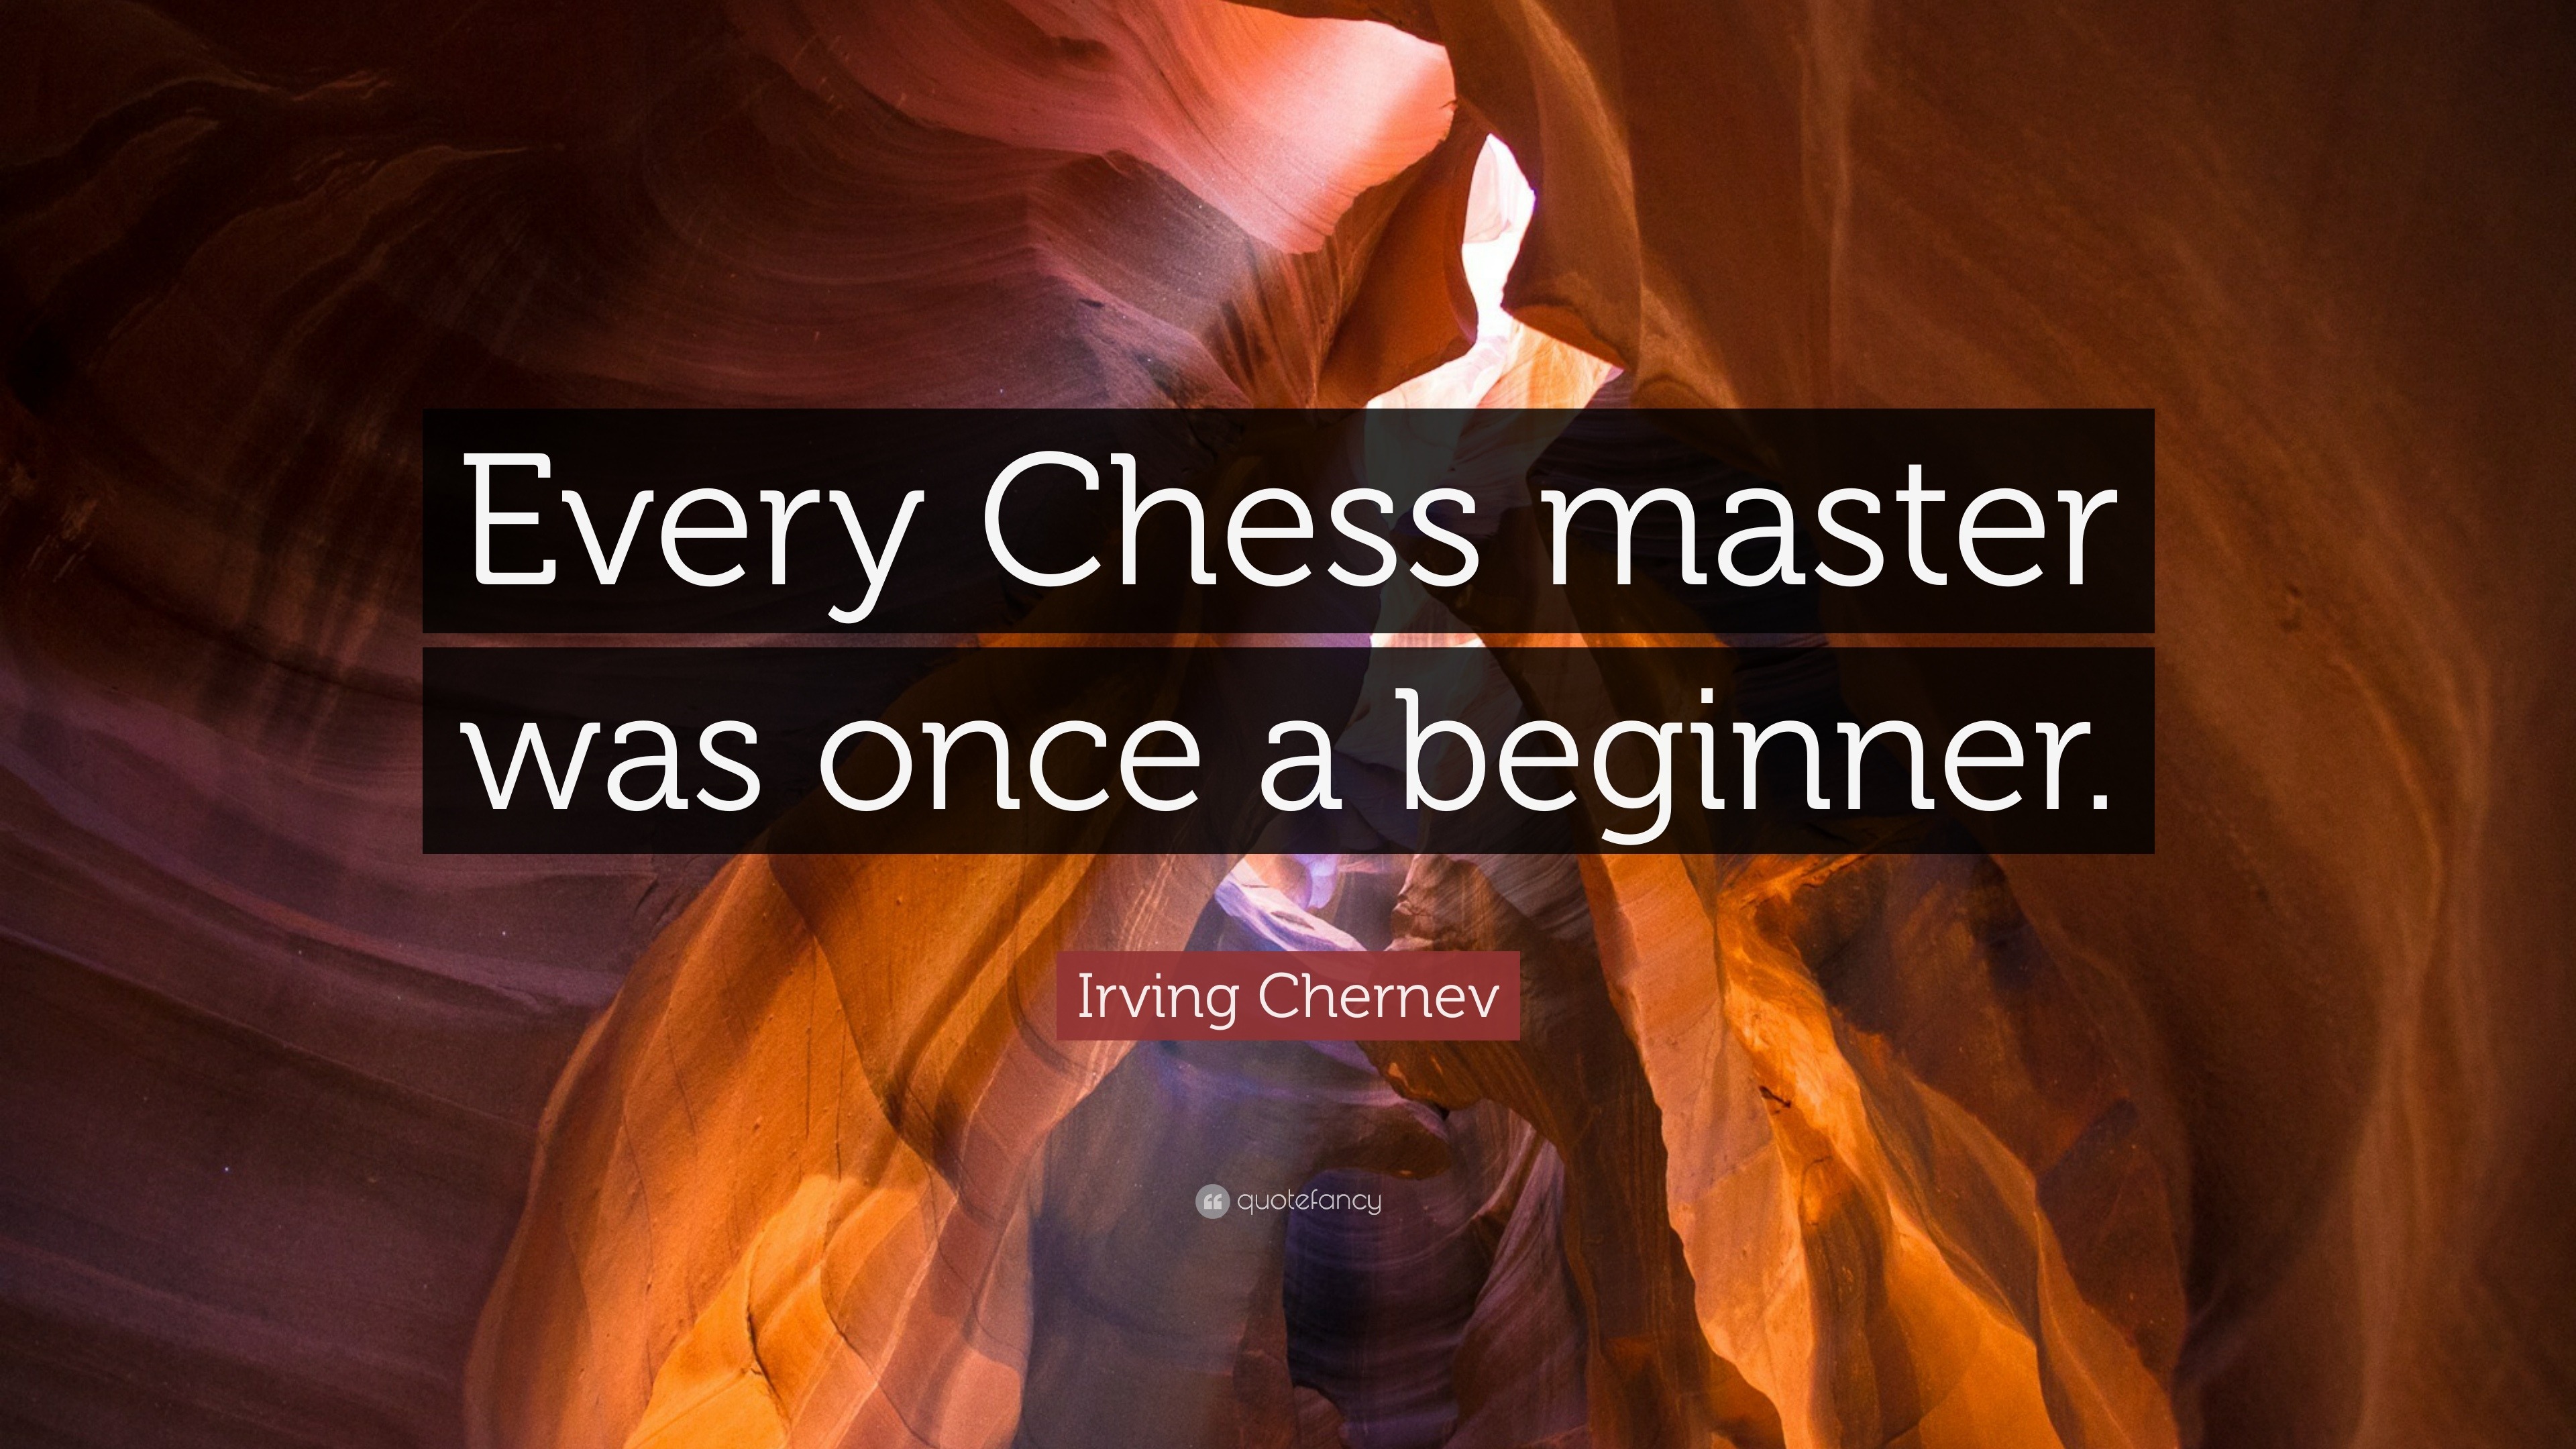 Sportz 360 India - Every Chess Master was once a Beginner Be it